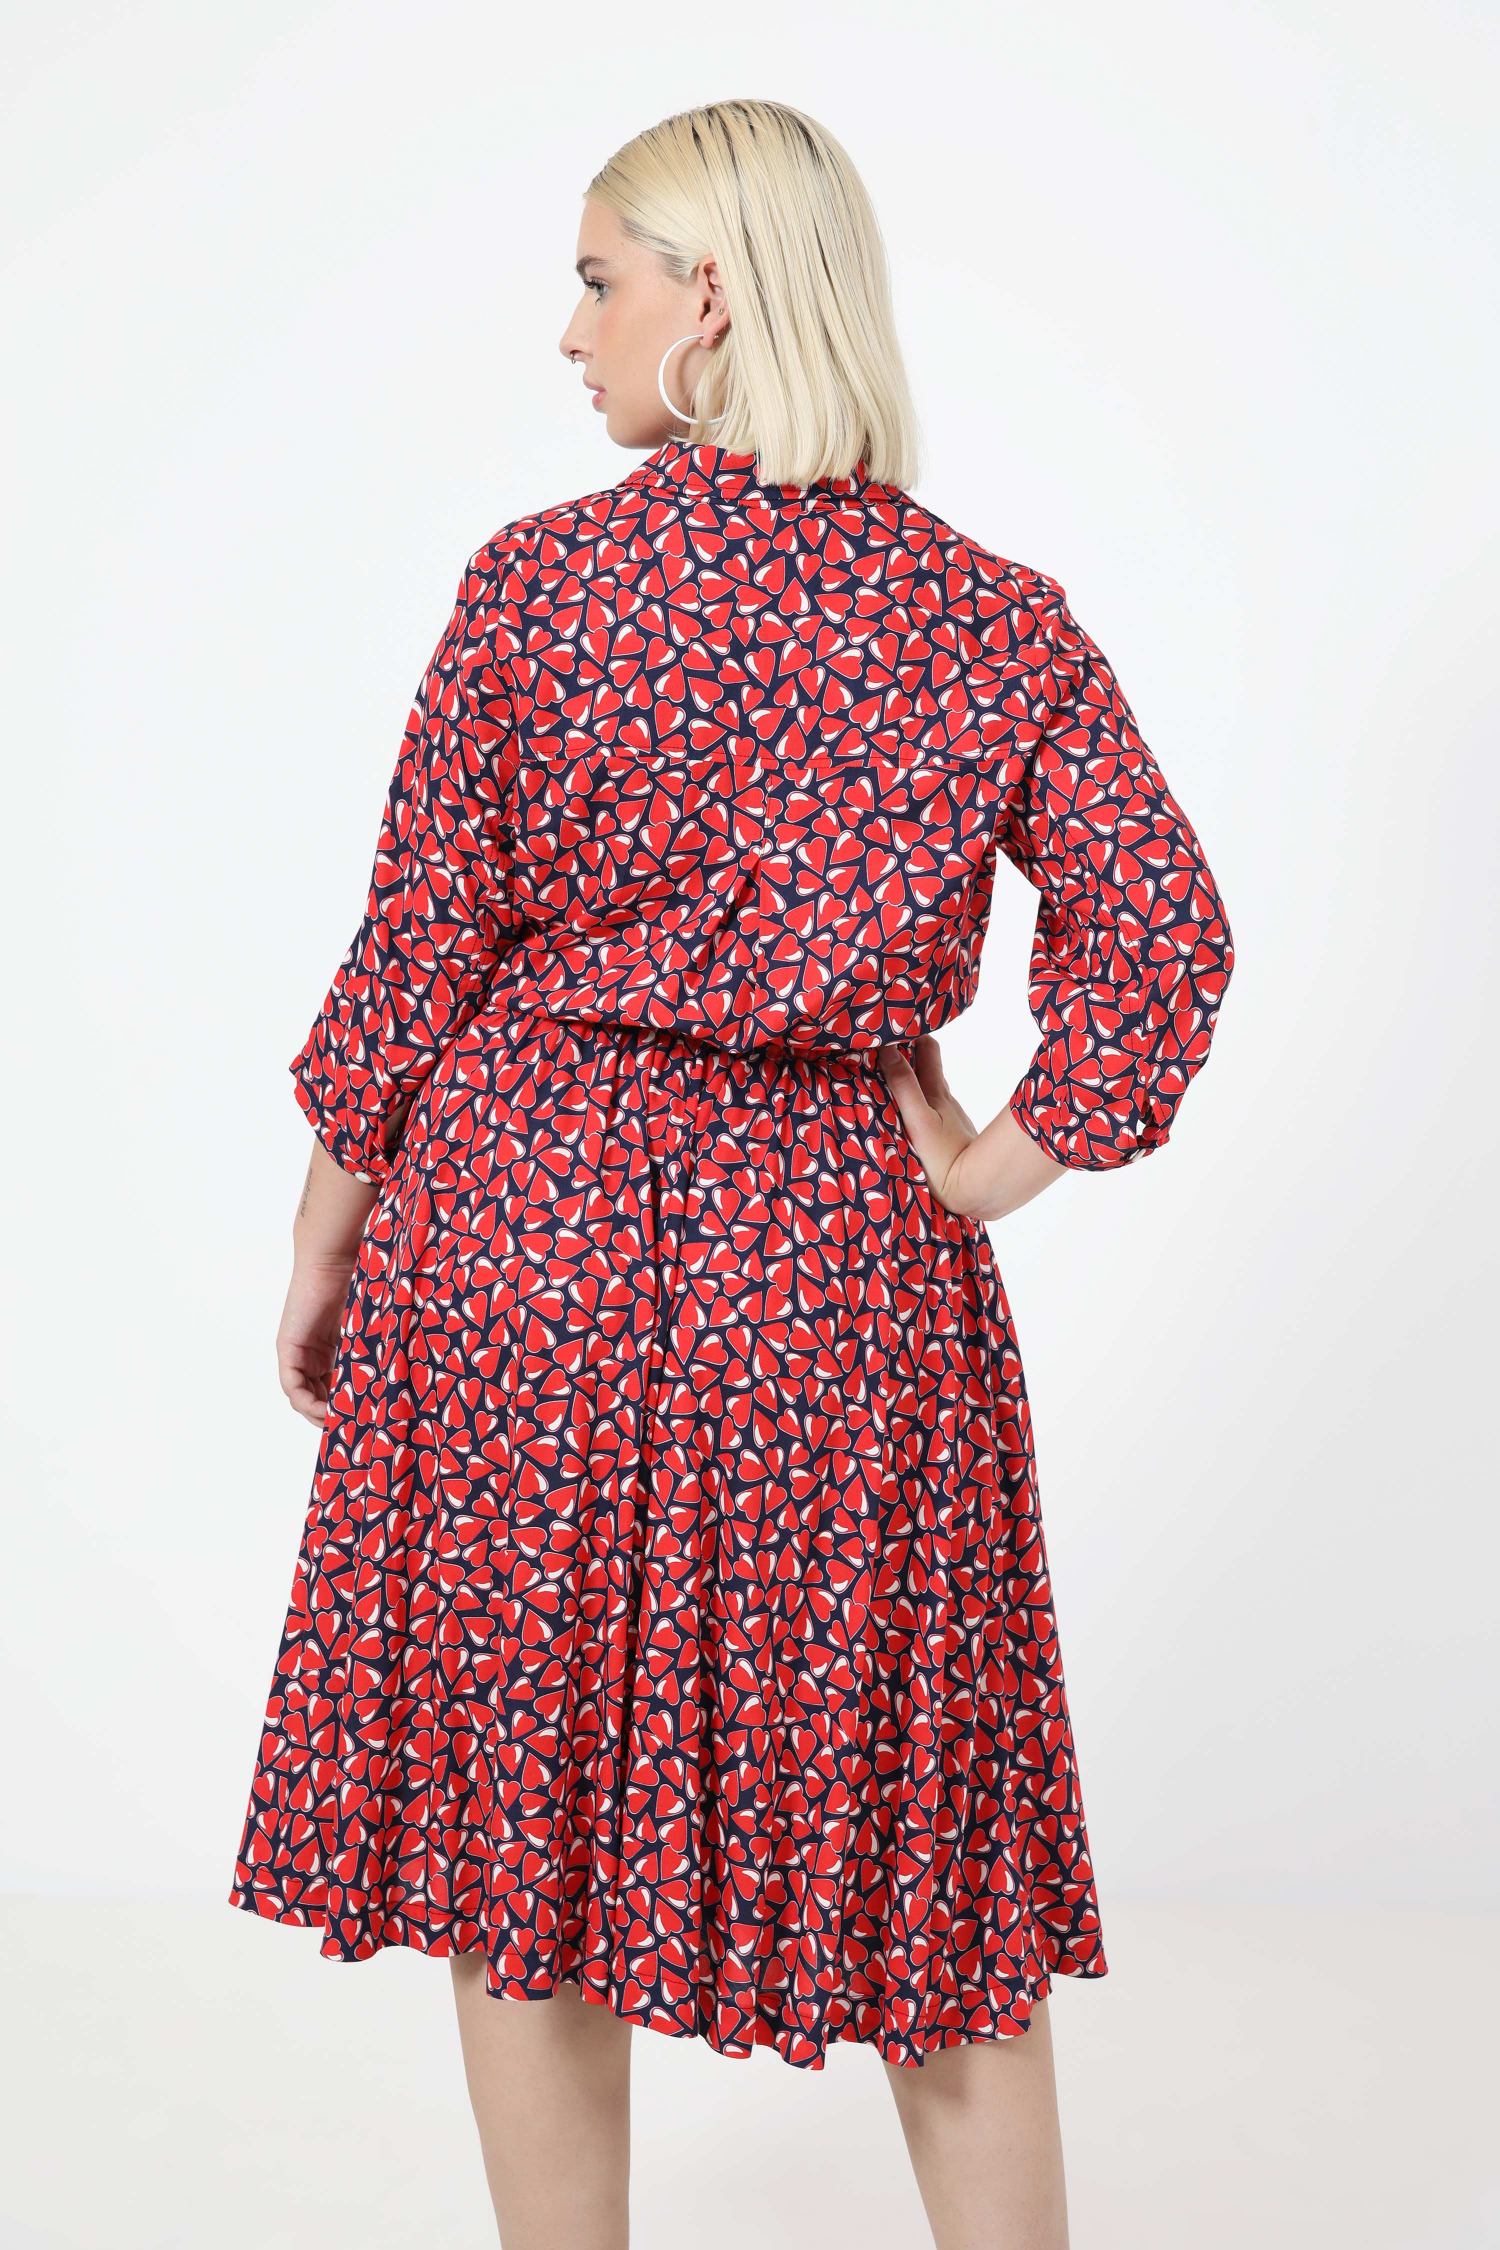 Printed mid-length dress. two-in-one effect